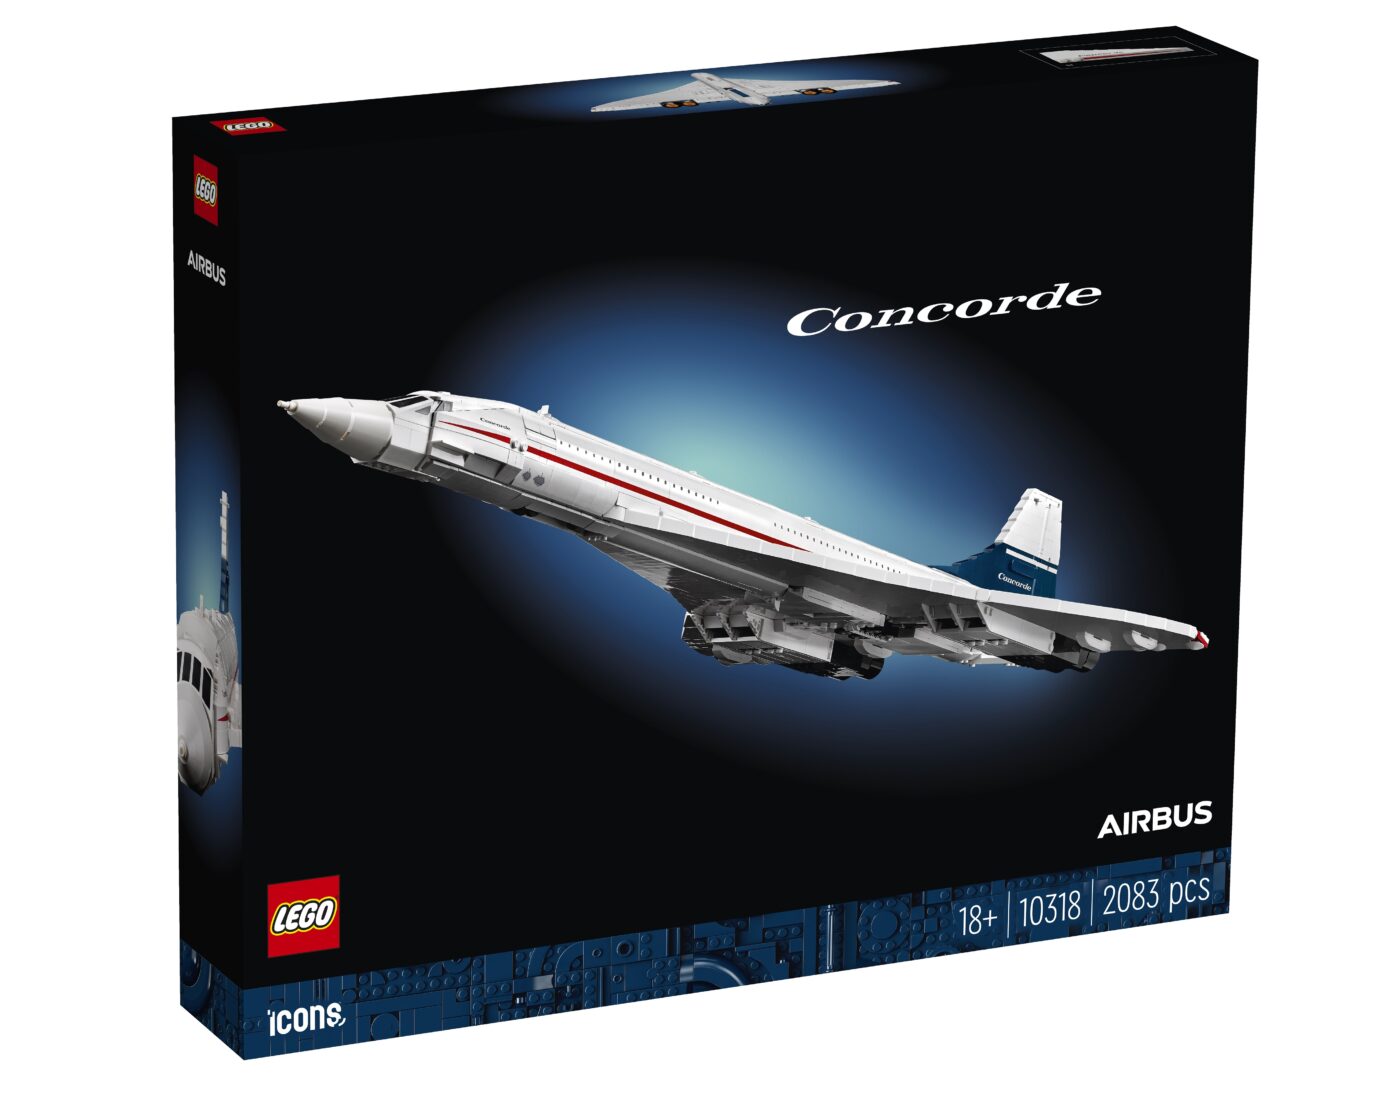 LEGO teases the supersonic reveal of the Concorde3